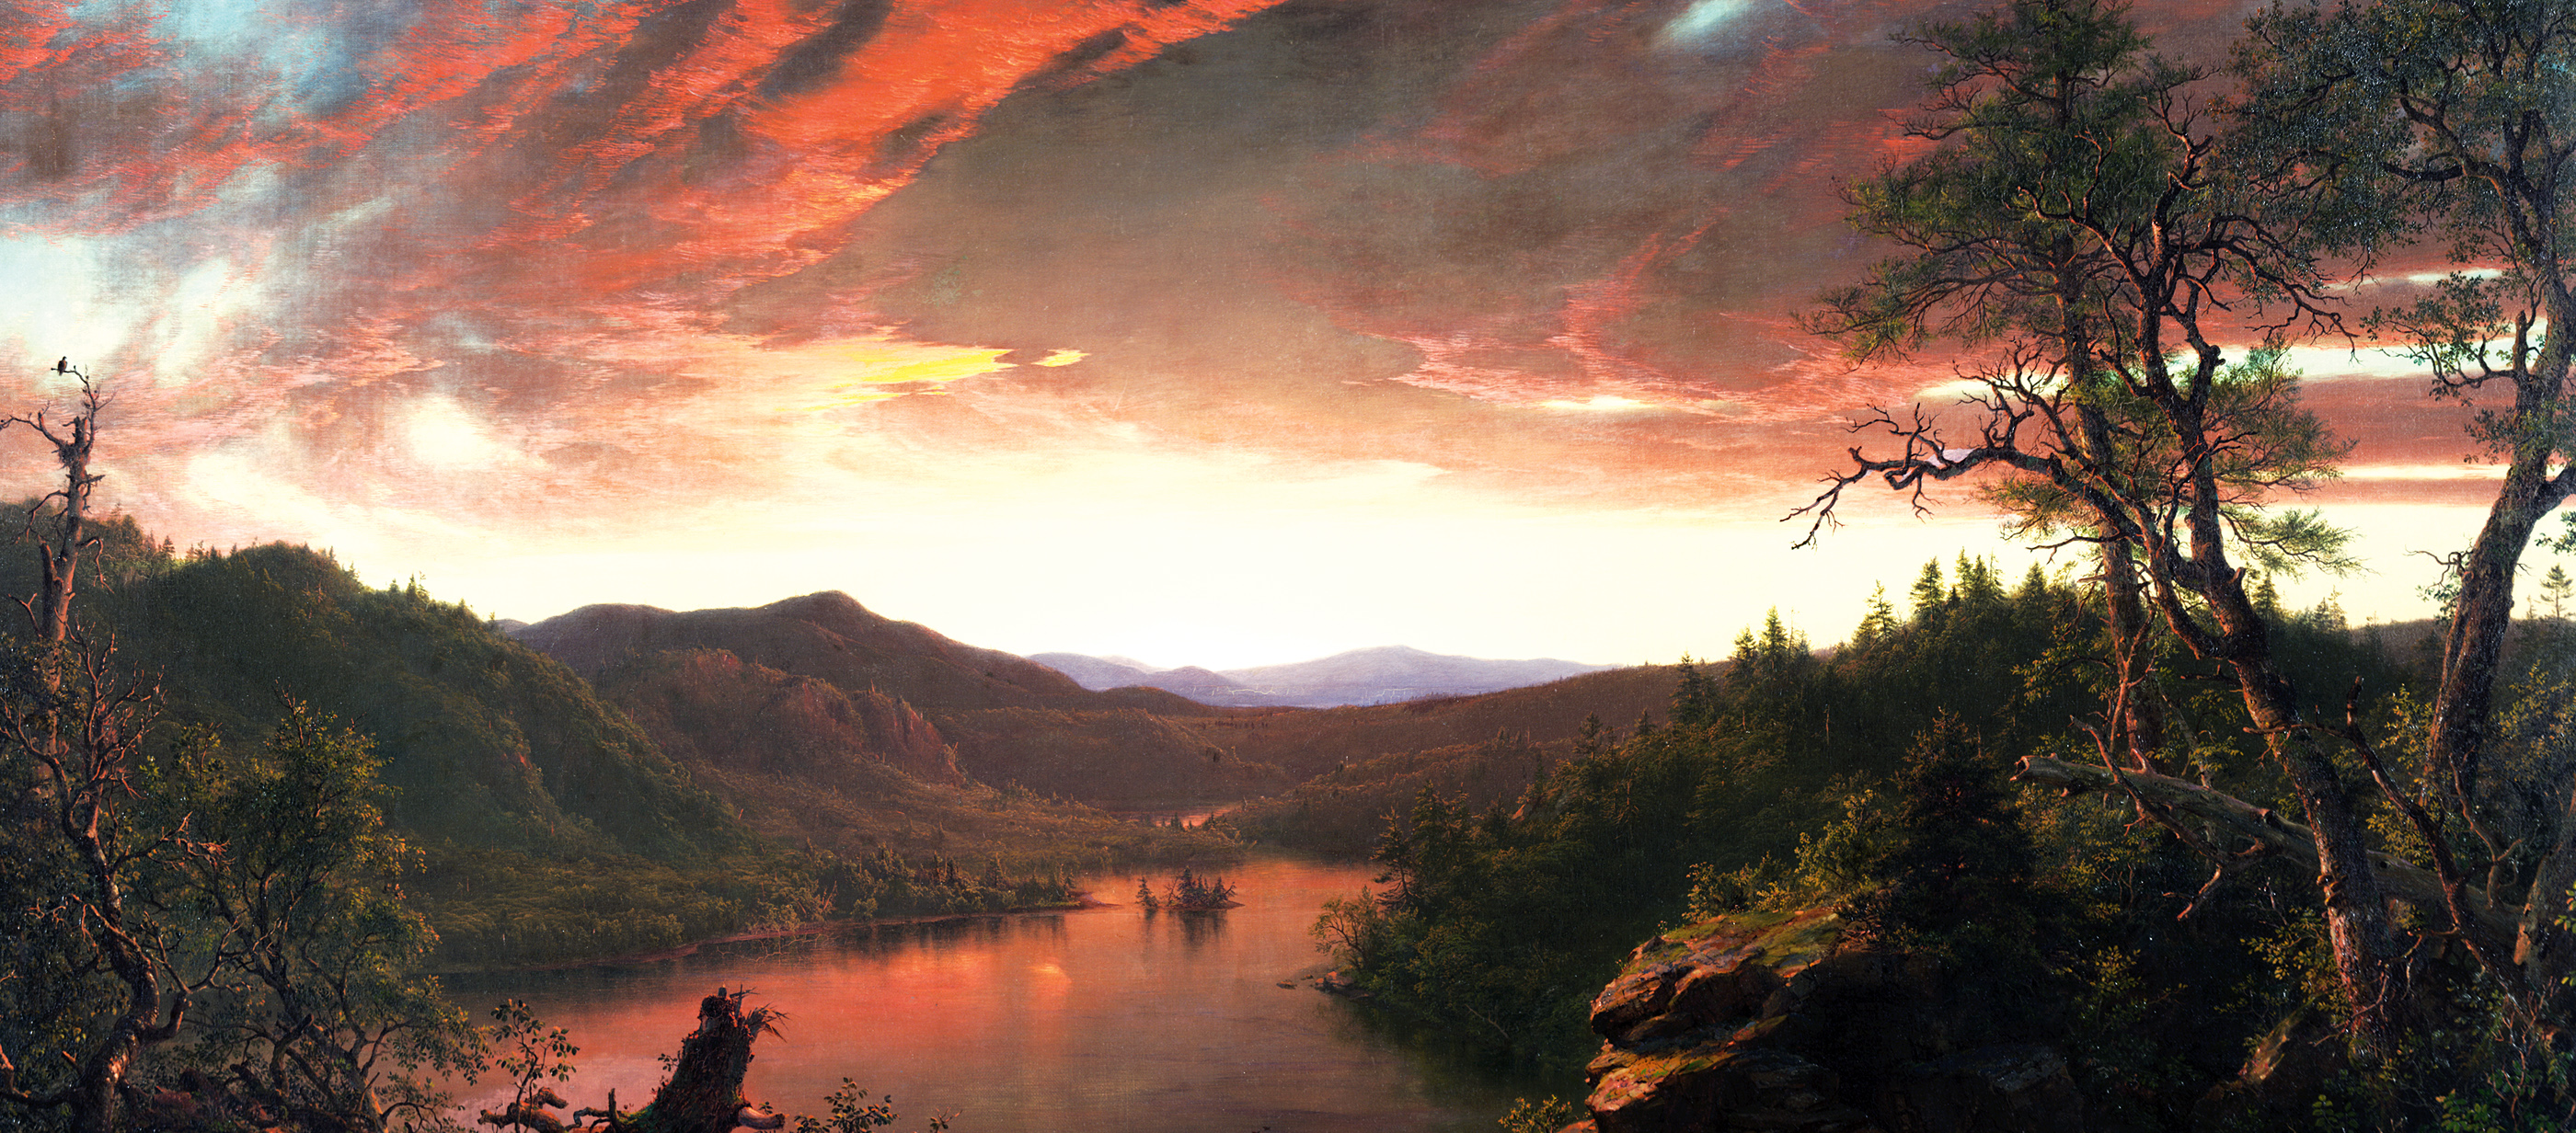 Twilight in the Wilderness, by Frederic Edwin Church, 1860. Cleveland Museum of Art, Cleveland, Ohio